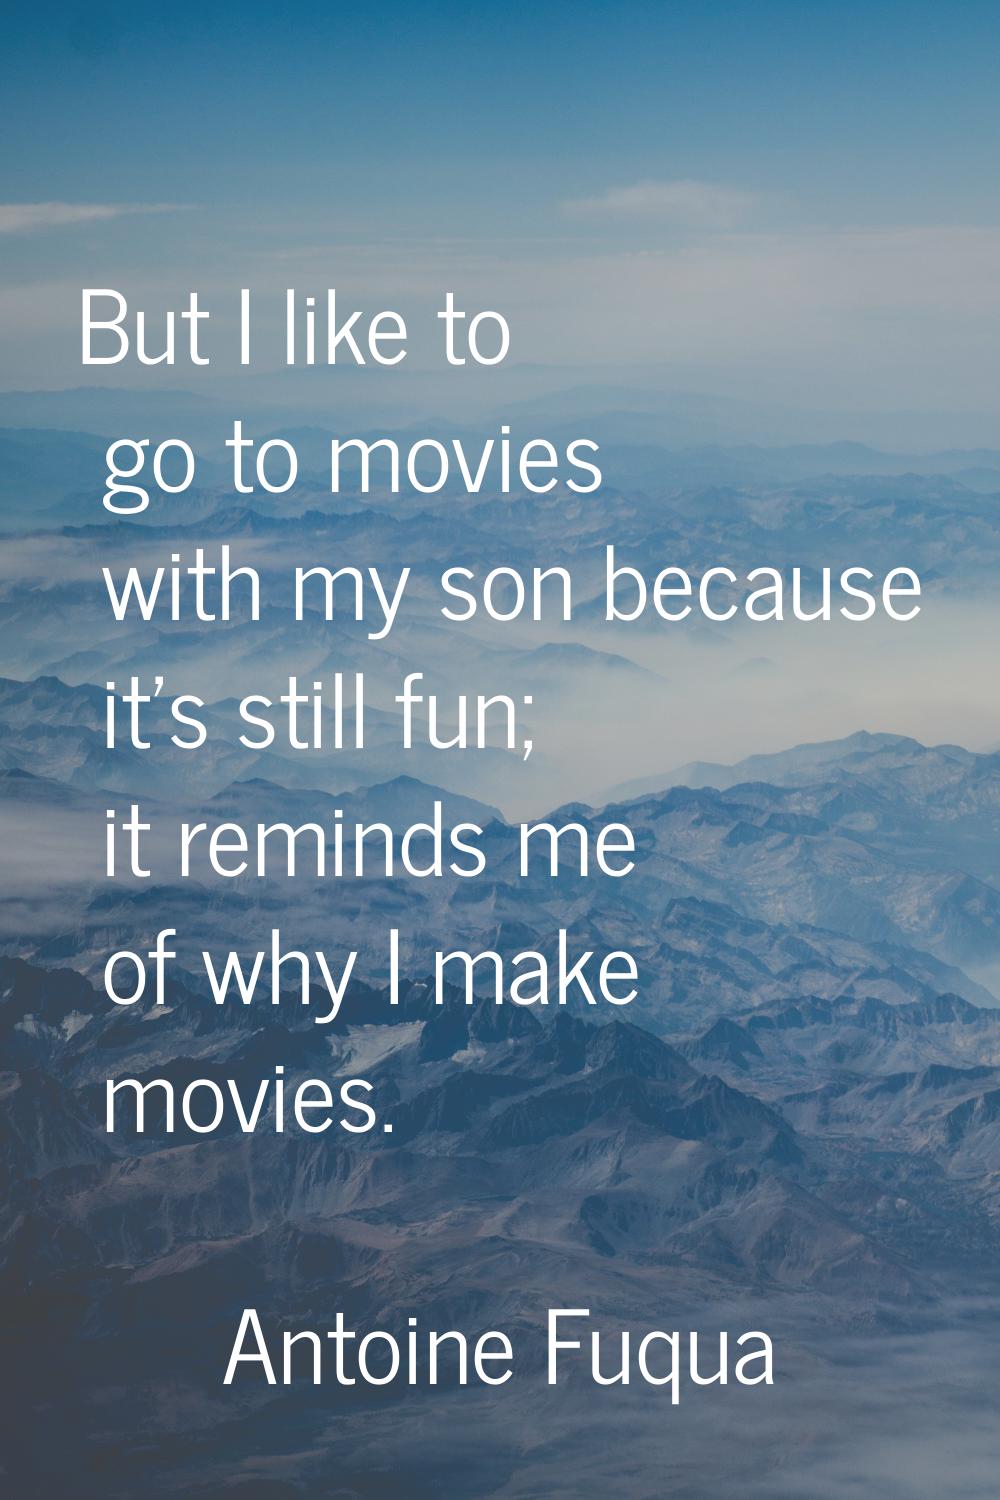 But I like to go to movies with my son because it's still fun; it reminds me of why I make movies.